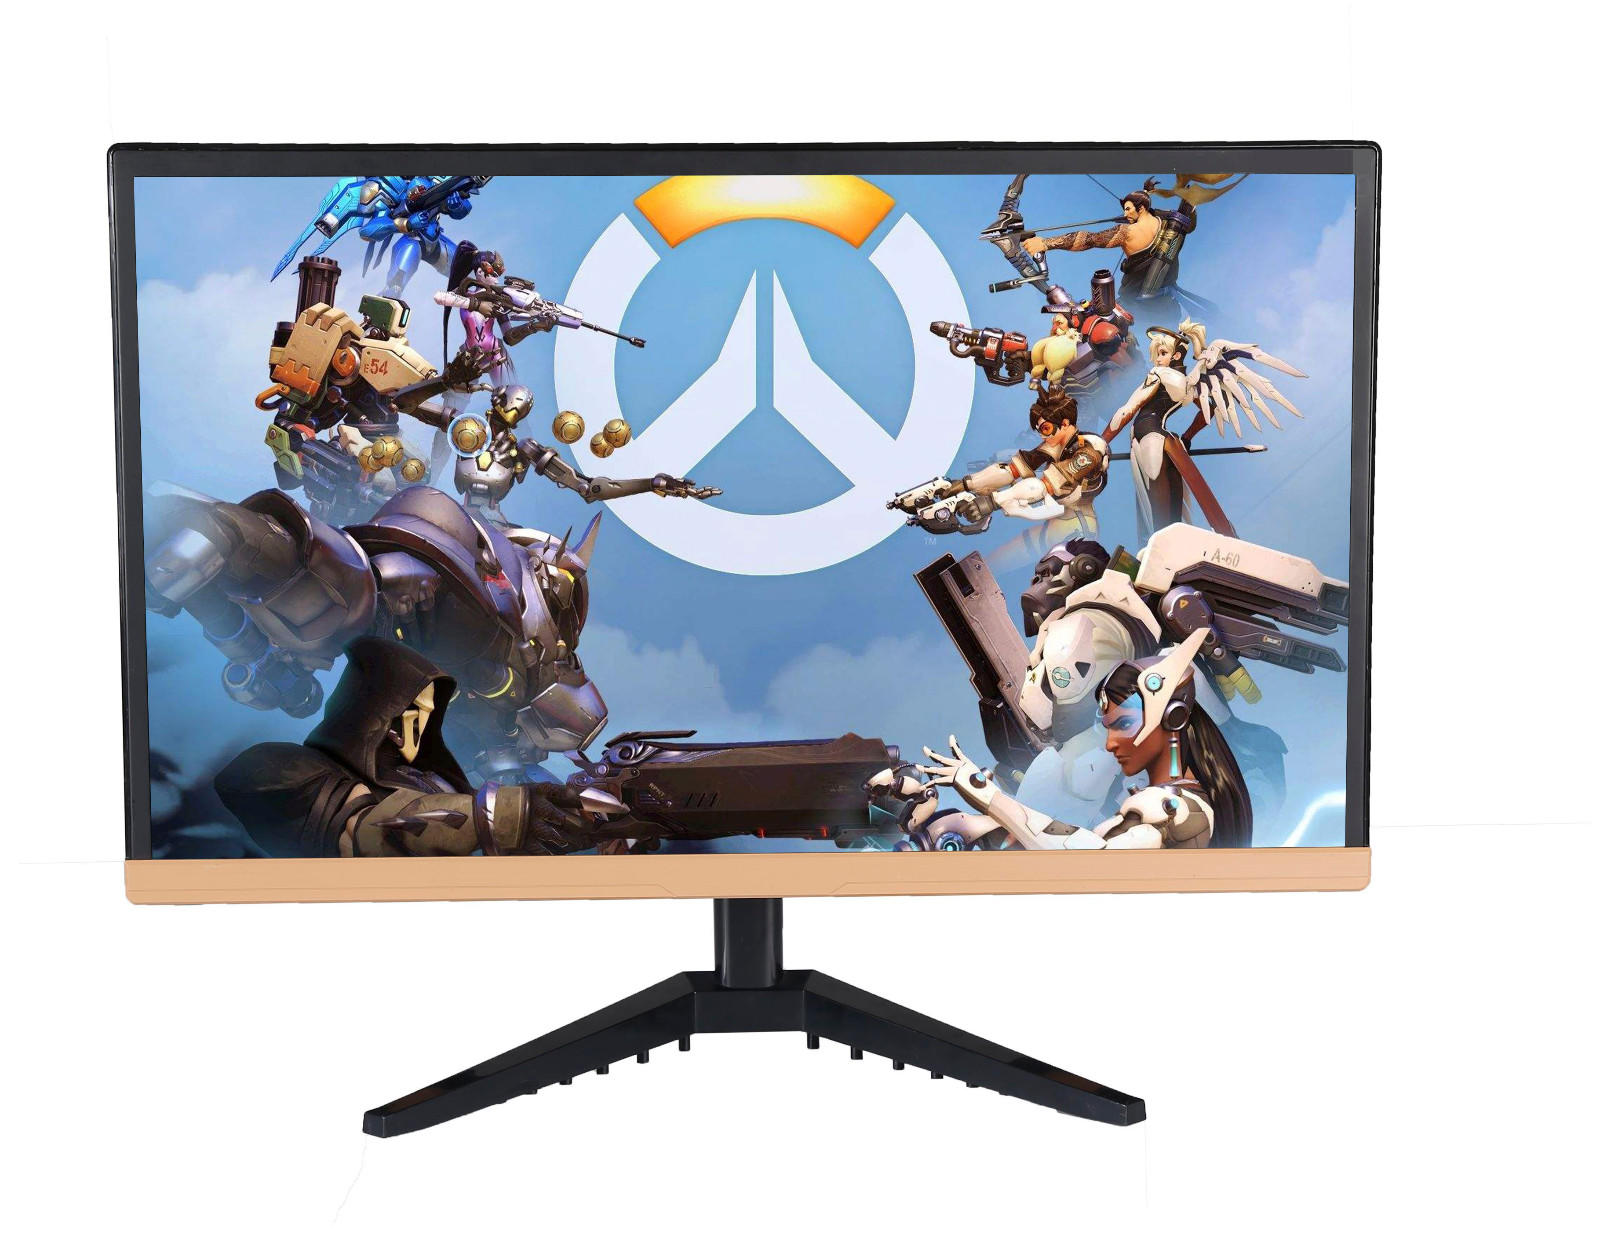 gaming 24 inch monitors for sale manufacturer for lcd screen